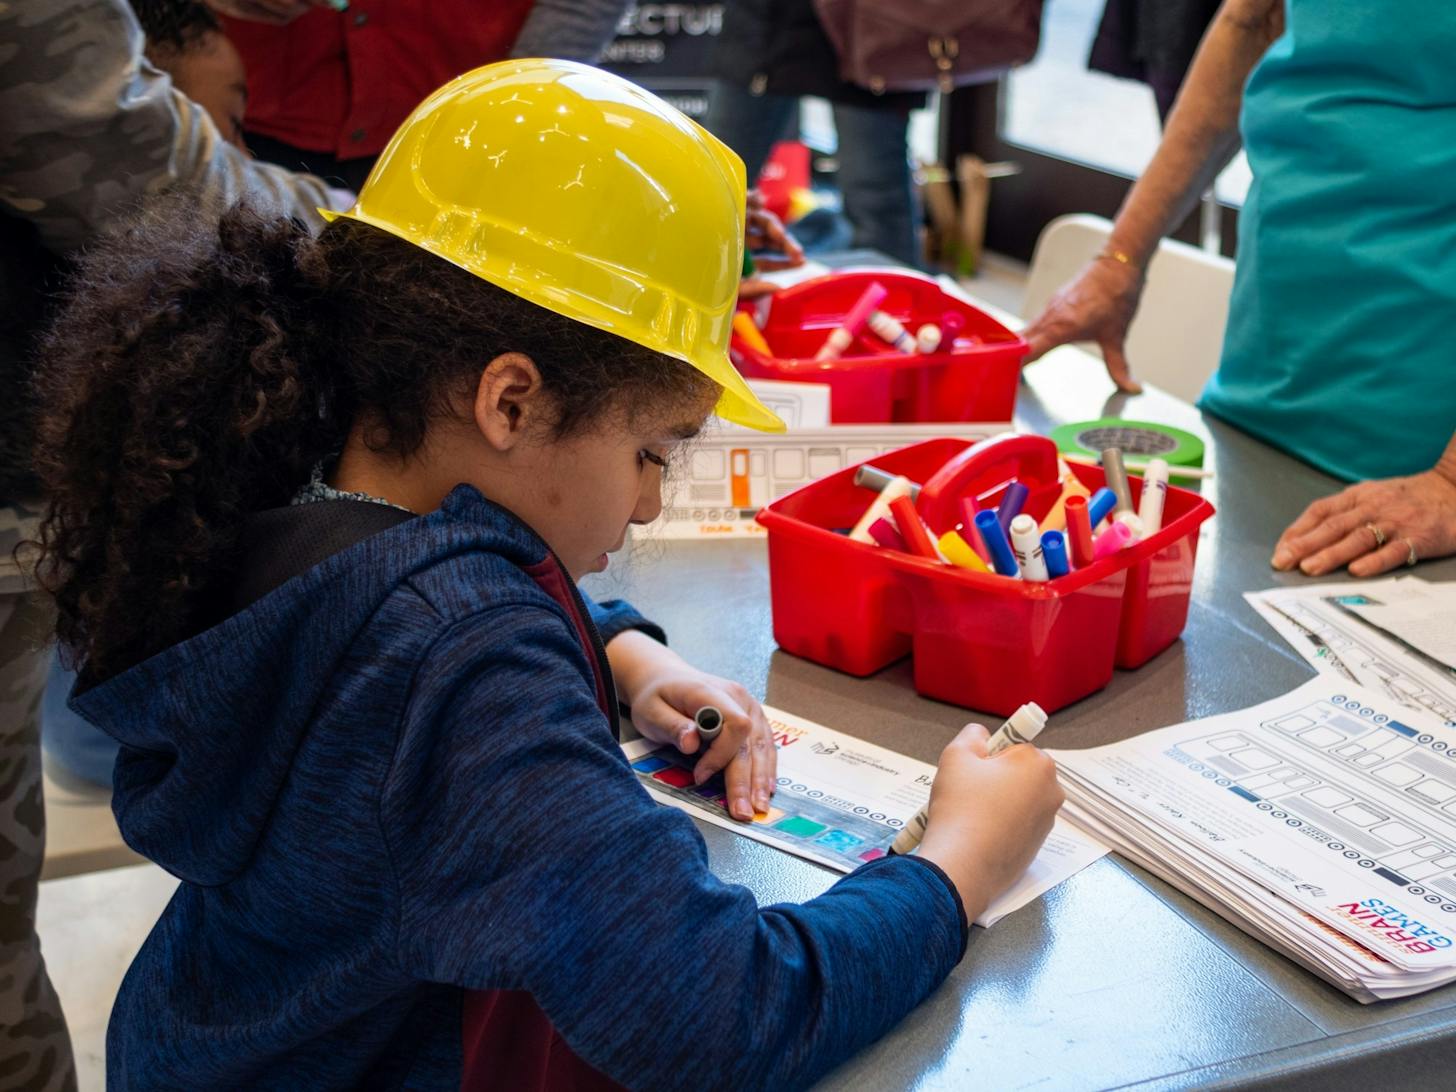 Architecture Courses and Workshops for Kids and High School Students, Features